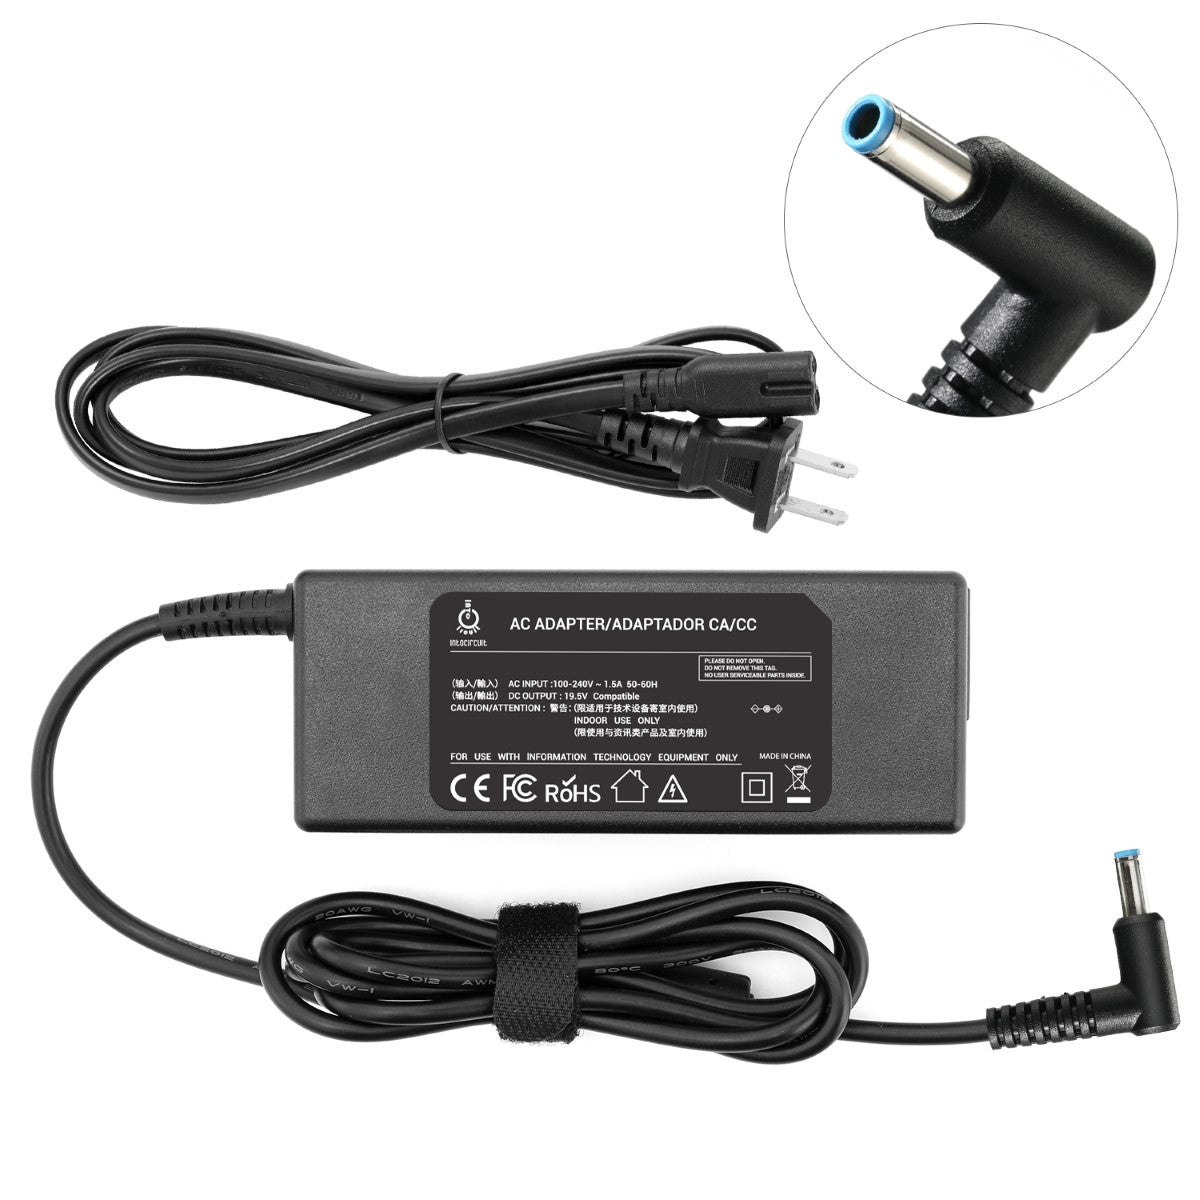 Charger for HP Pavilion 15-g019wm Laptop